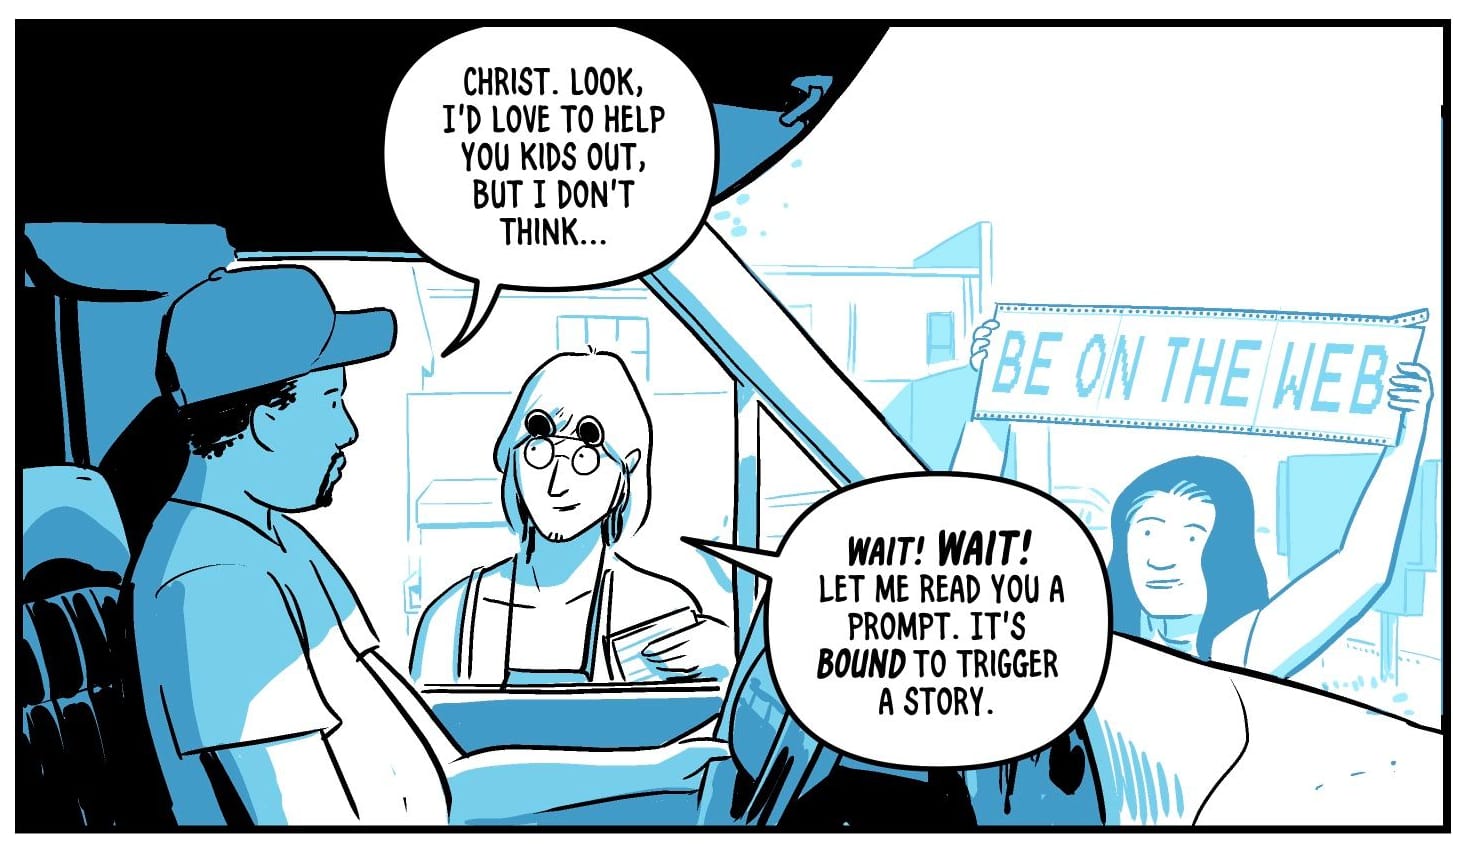 Comic panel: a view from inside a parked car. Two teenagers outside the car try to convince the driver to join the internet. One of them holds a banner on perforated printed paper that says: be on the web. The driver says: christ. Look, I’d love to help you kids out, but I don’t think… One of the teenagers interrupts: wait! Wait! Let me read you a prompt. It’s bound to trigger a story.